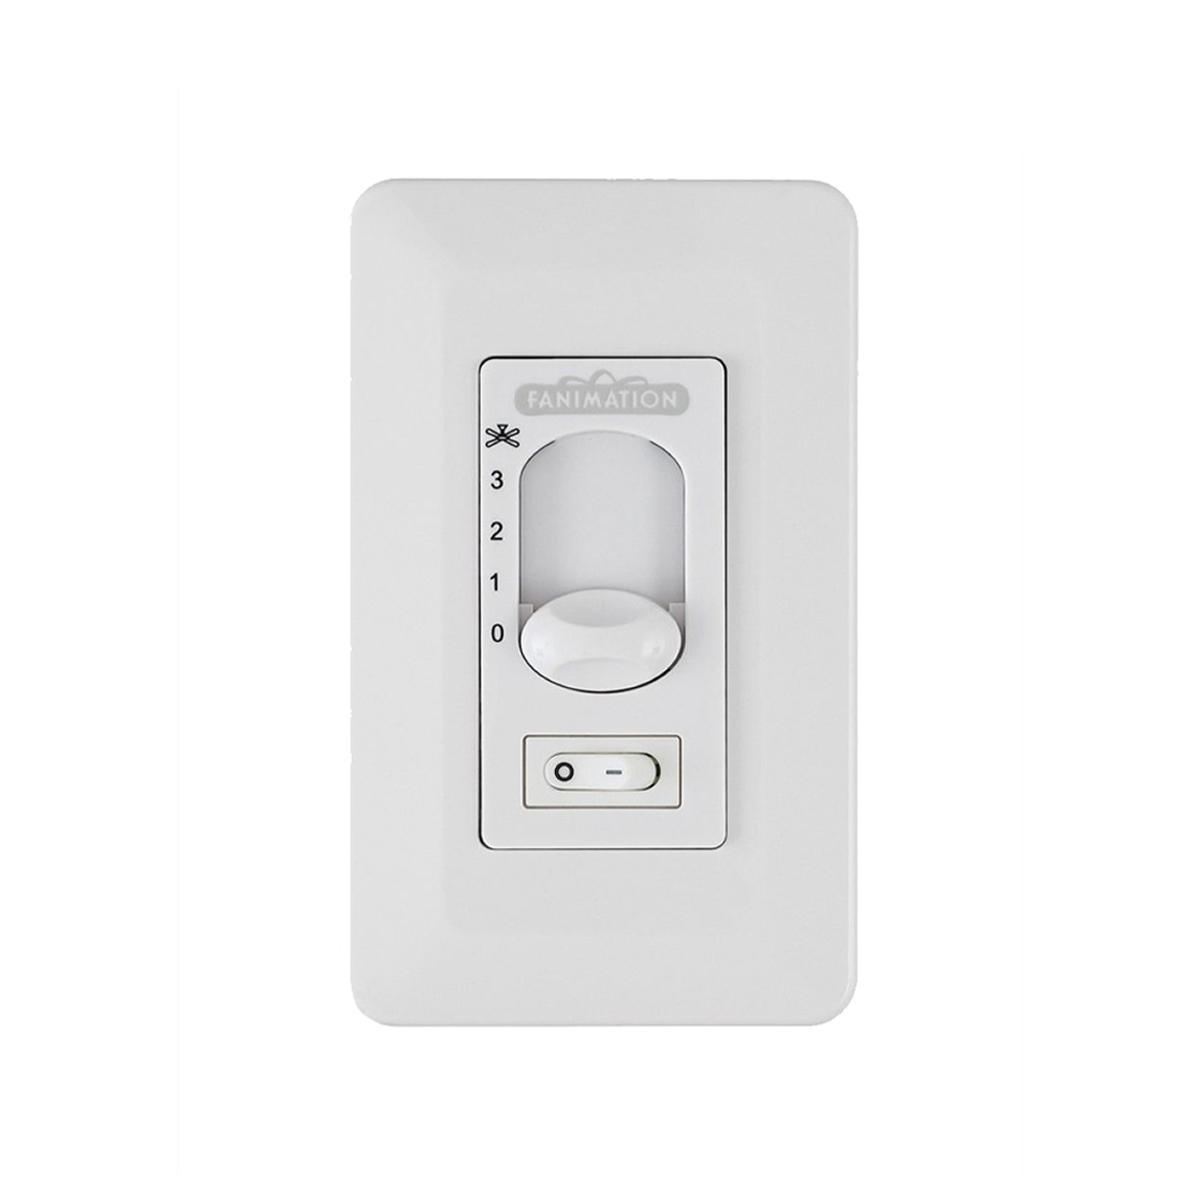 3-Speed Ceiling Fan And Toggle ON/OFF Light Wall Control, White Finish